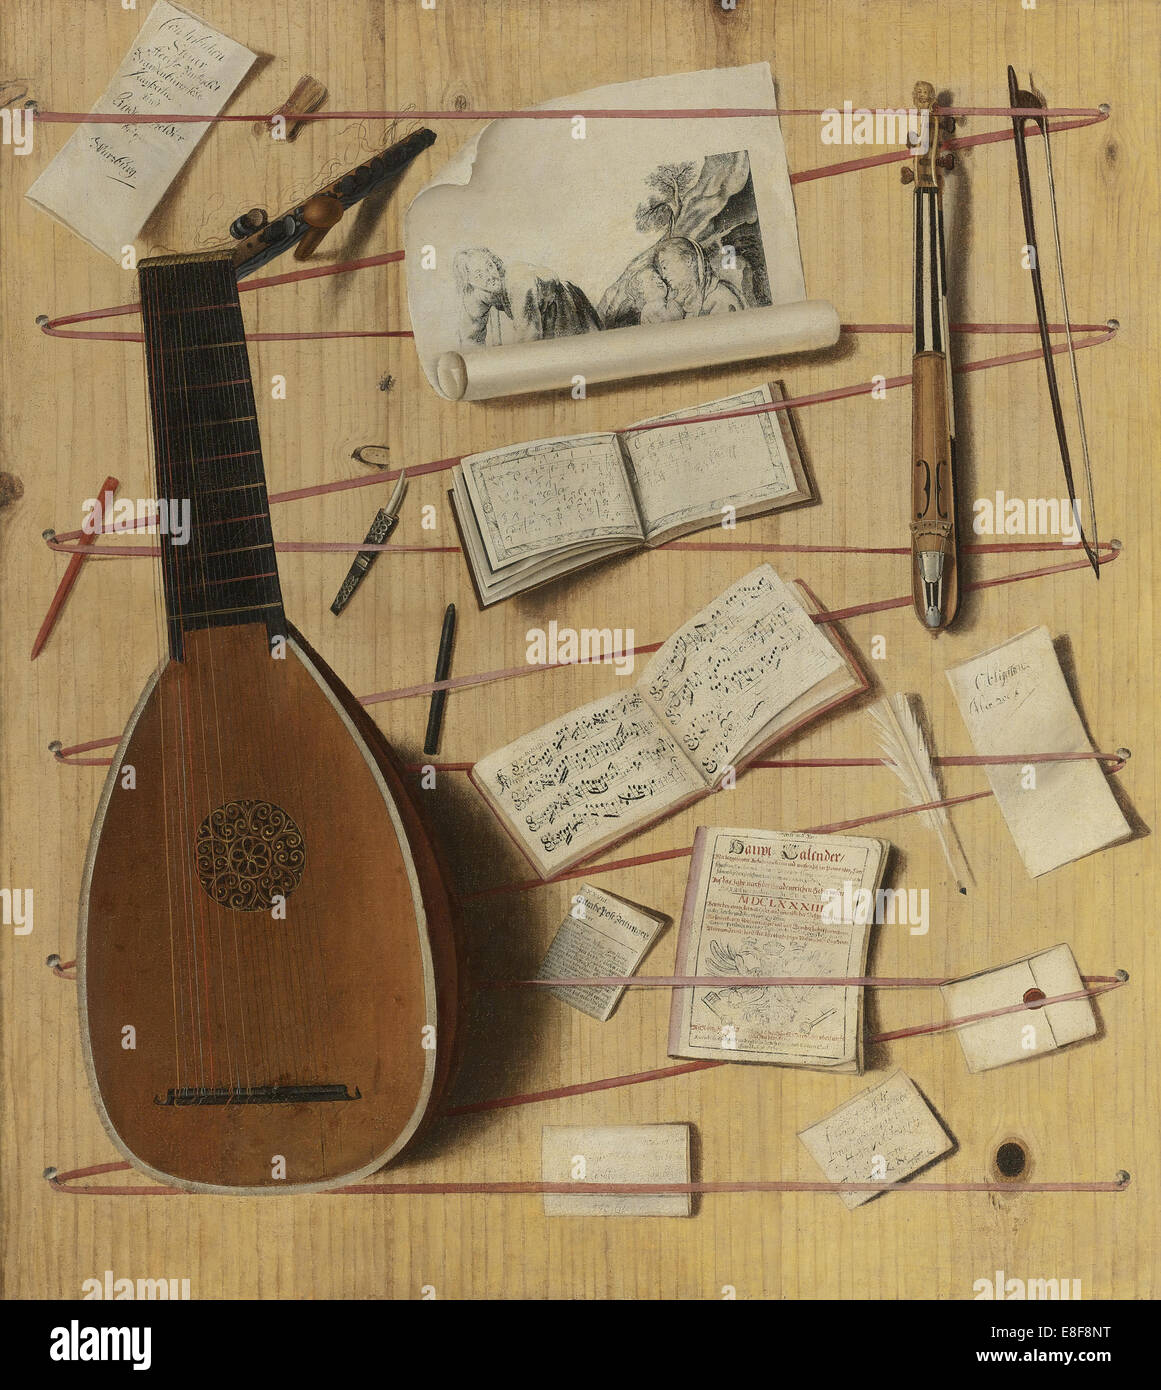 Trompe l'oeil still life with a lute, rebec and music sheets. Artist: Gijsbrechts, Cornelis Norbertus (before 1657-after 1675) Stock Photo